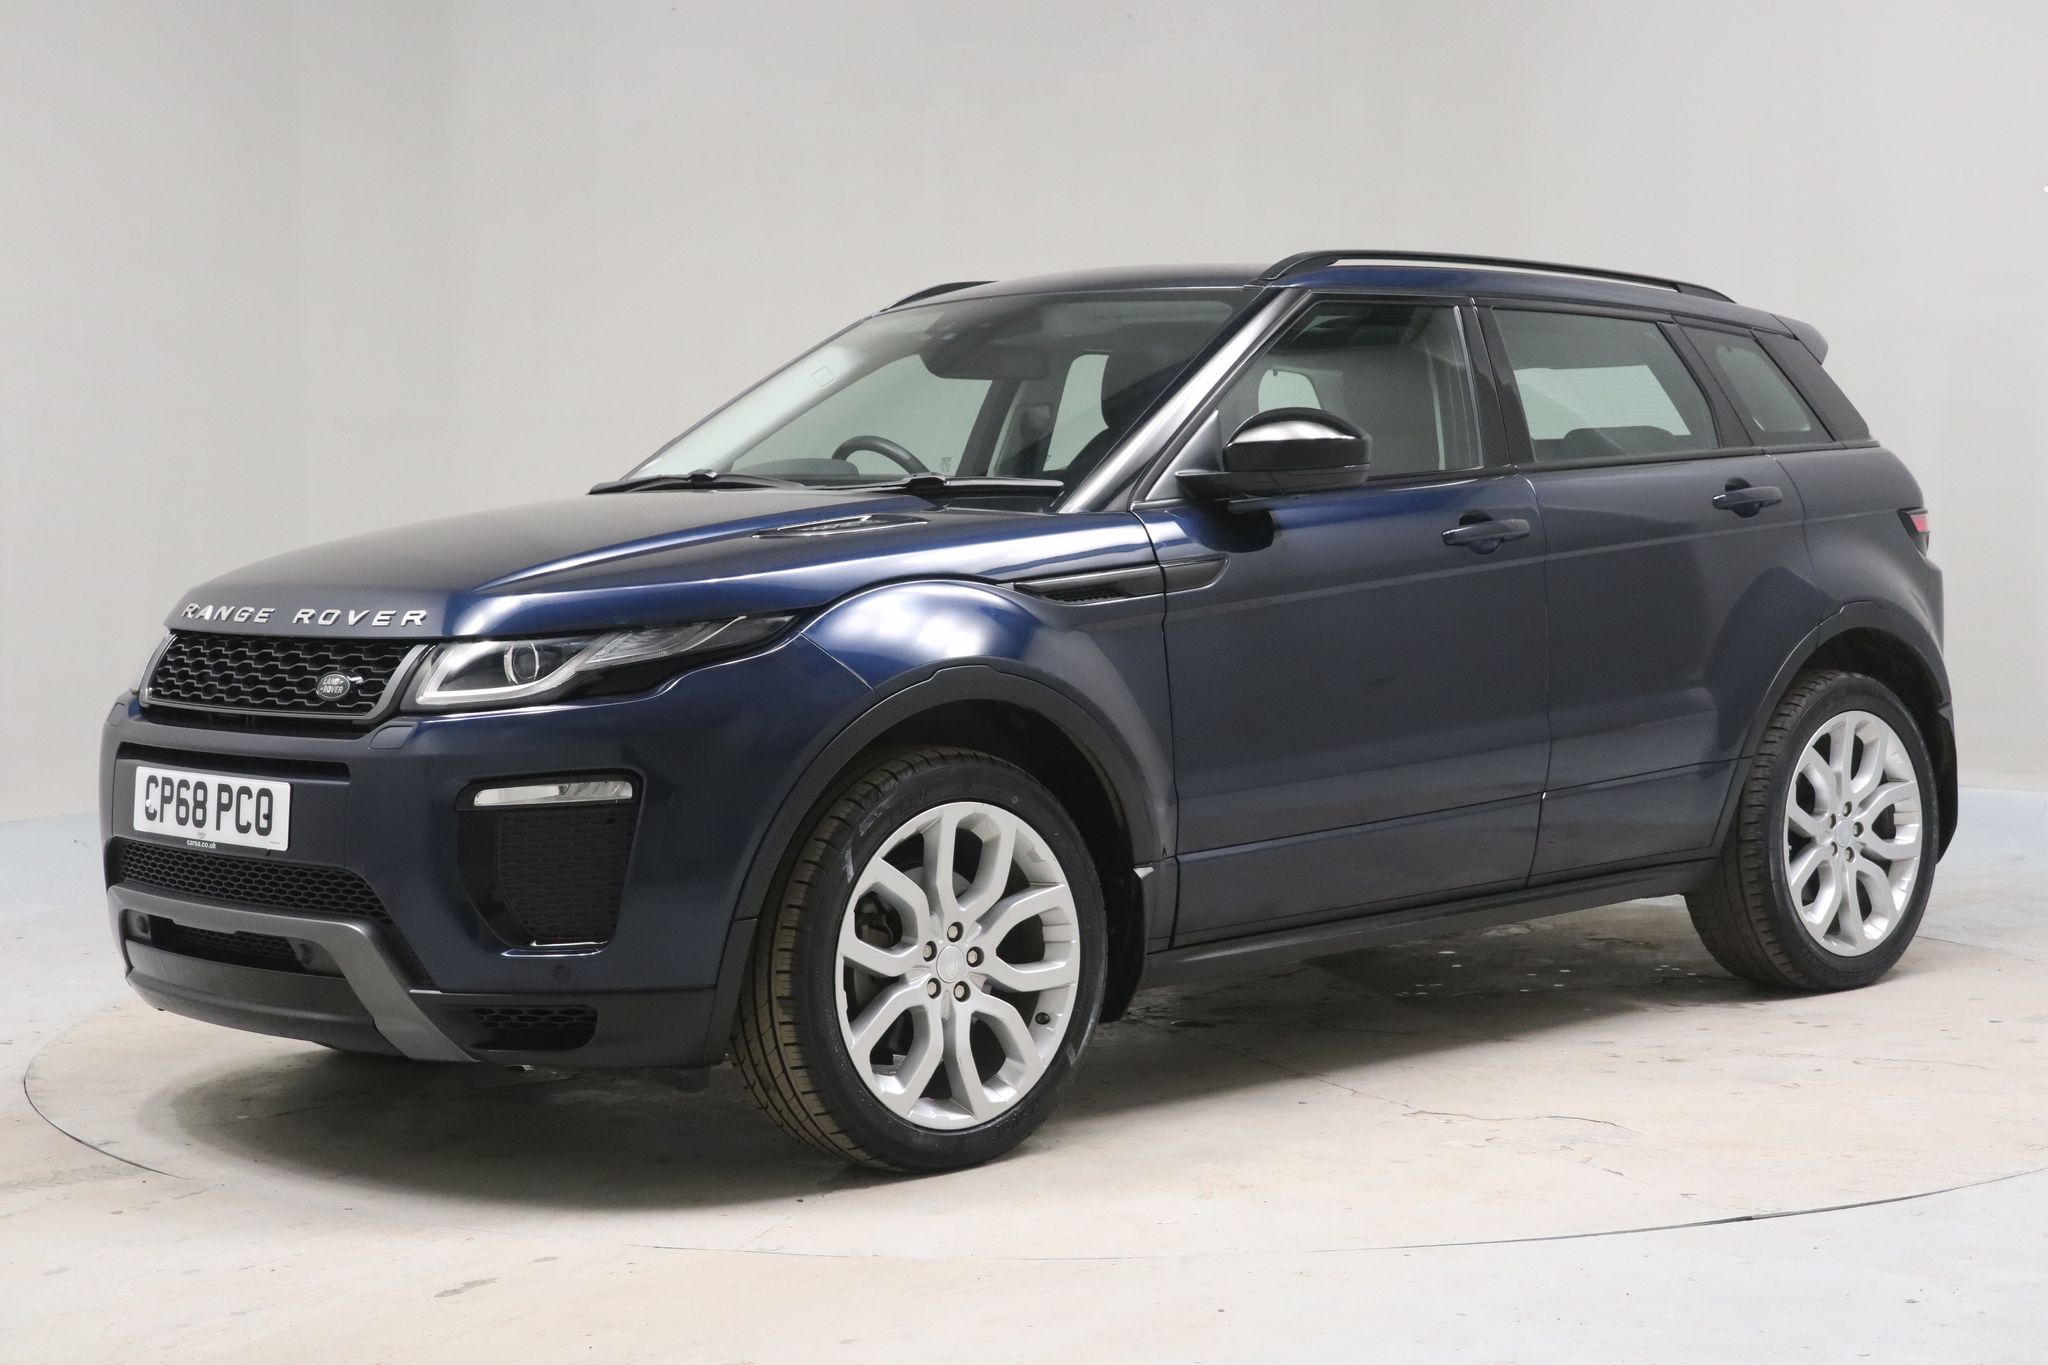 2018 used Land Rover Range Rover Evoque 2.0 TD4 HSE Dynamic 4WD (180 ps)